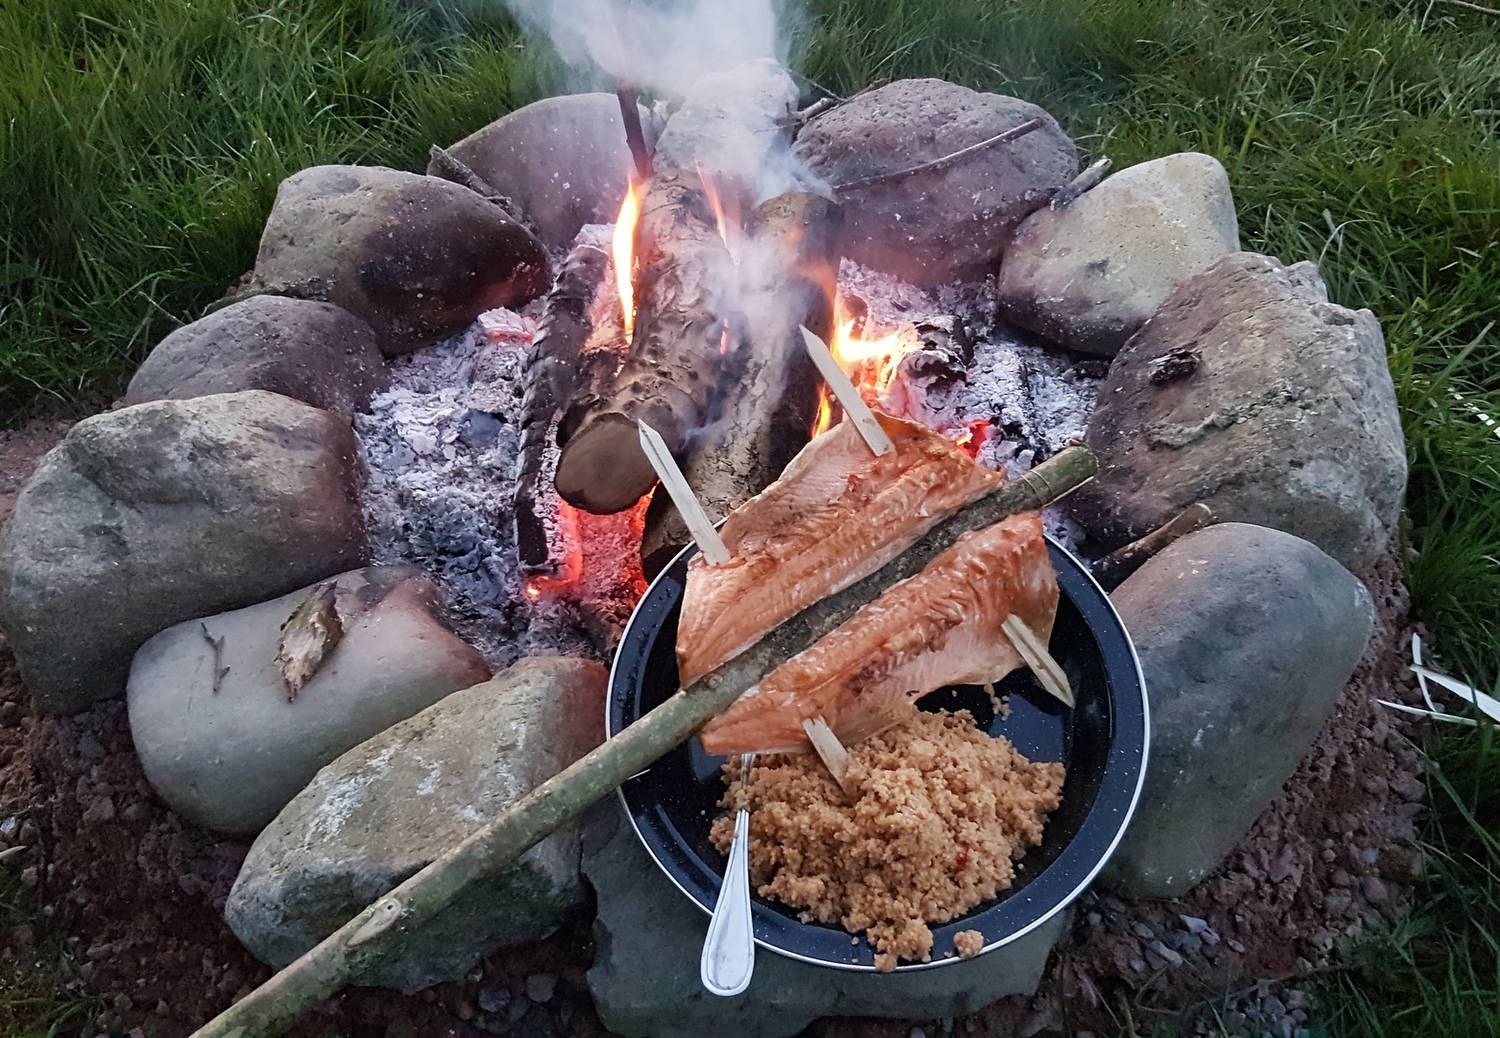 A photograph of cooked trout next to a campfire